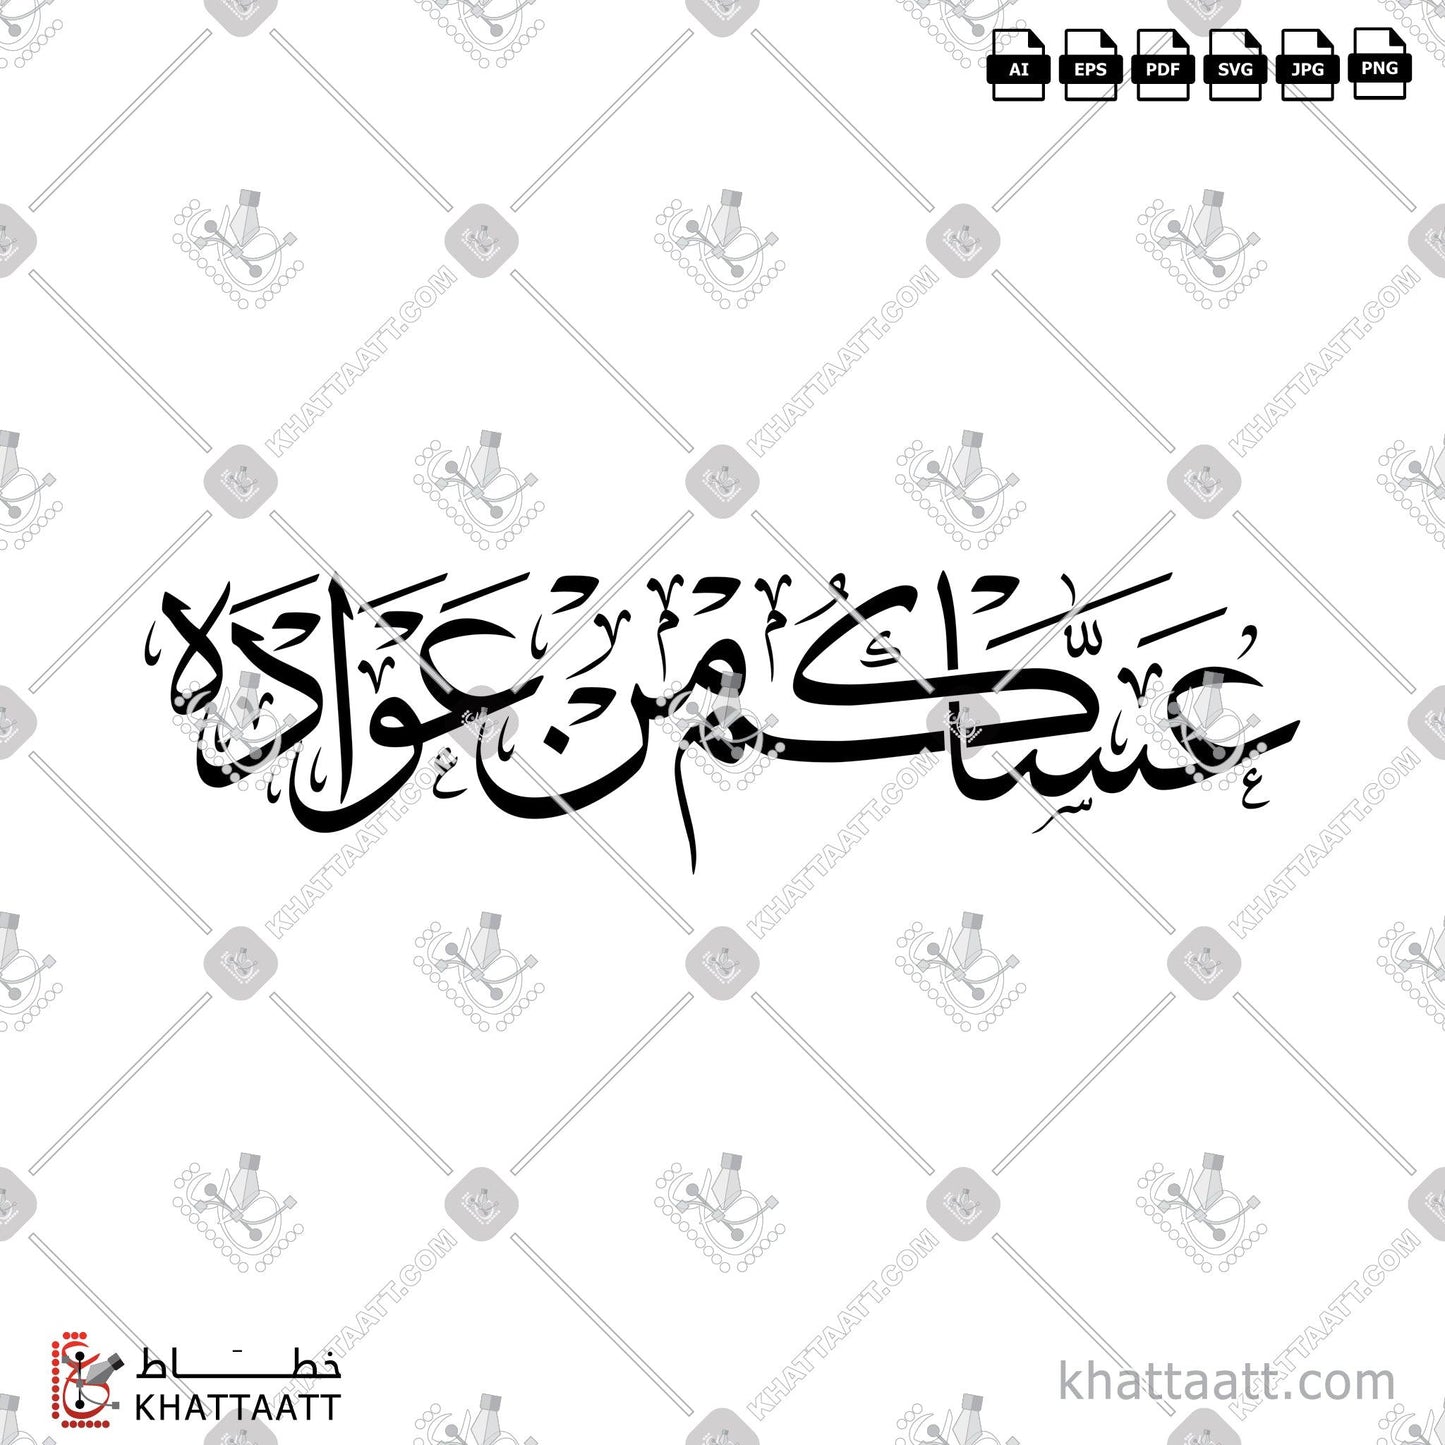 Download Arabic Calligraphy of عساكم من عواده in Thuluth - خط الثلث in vector and .png